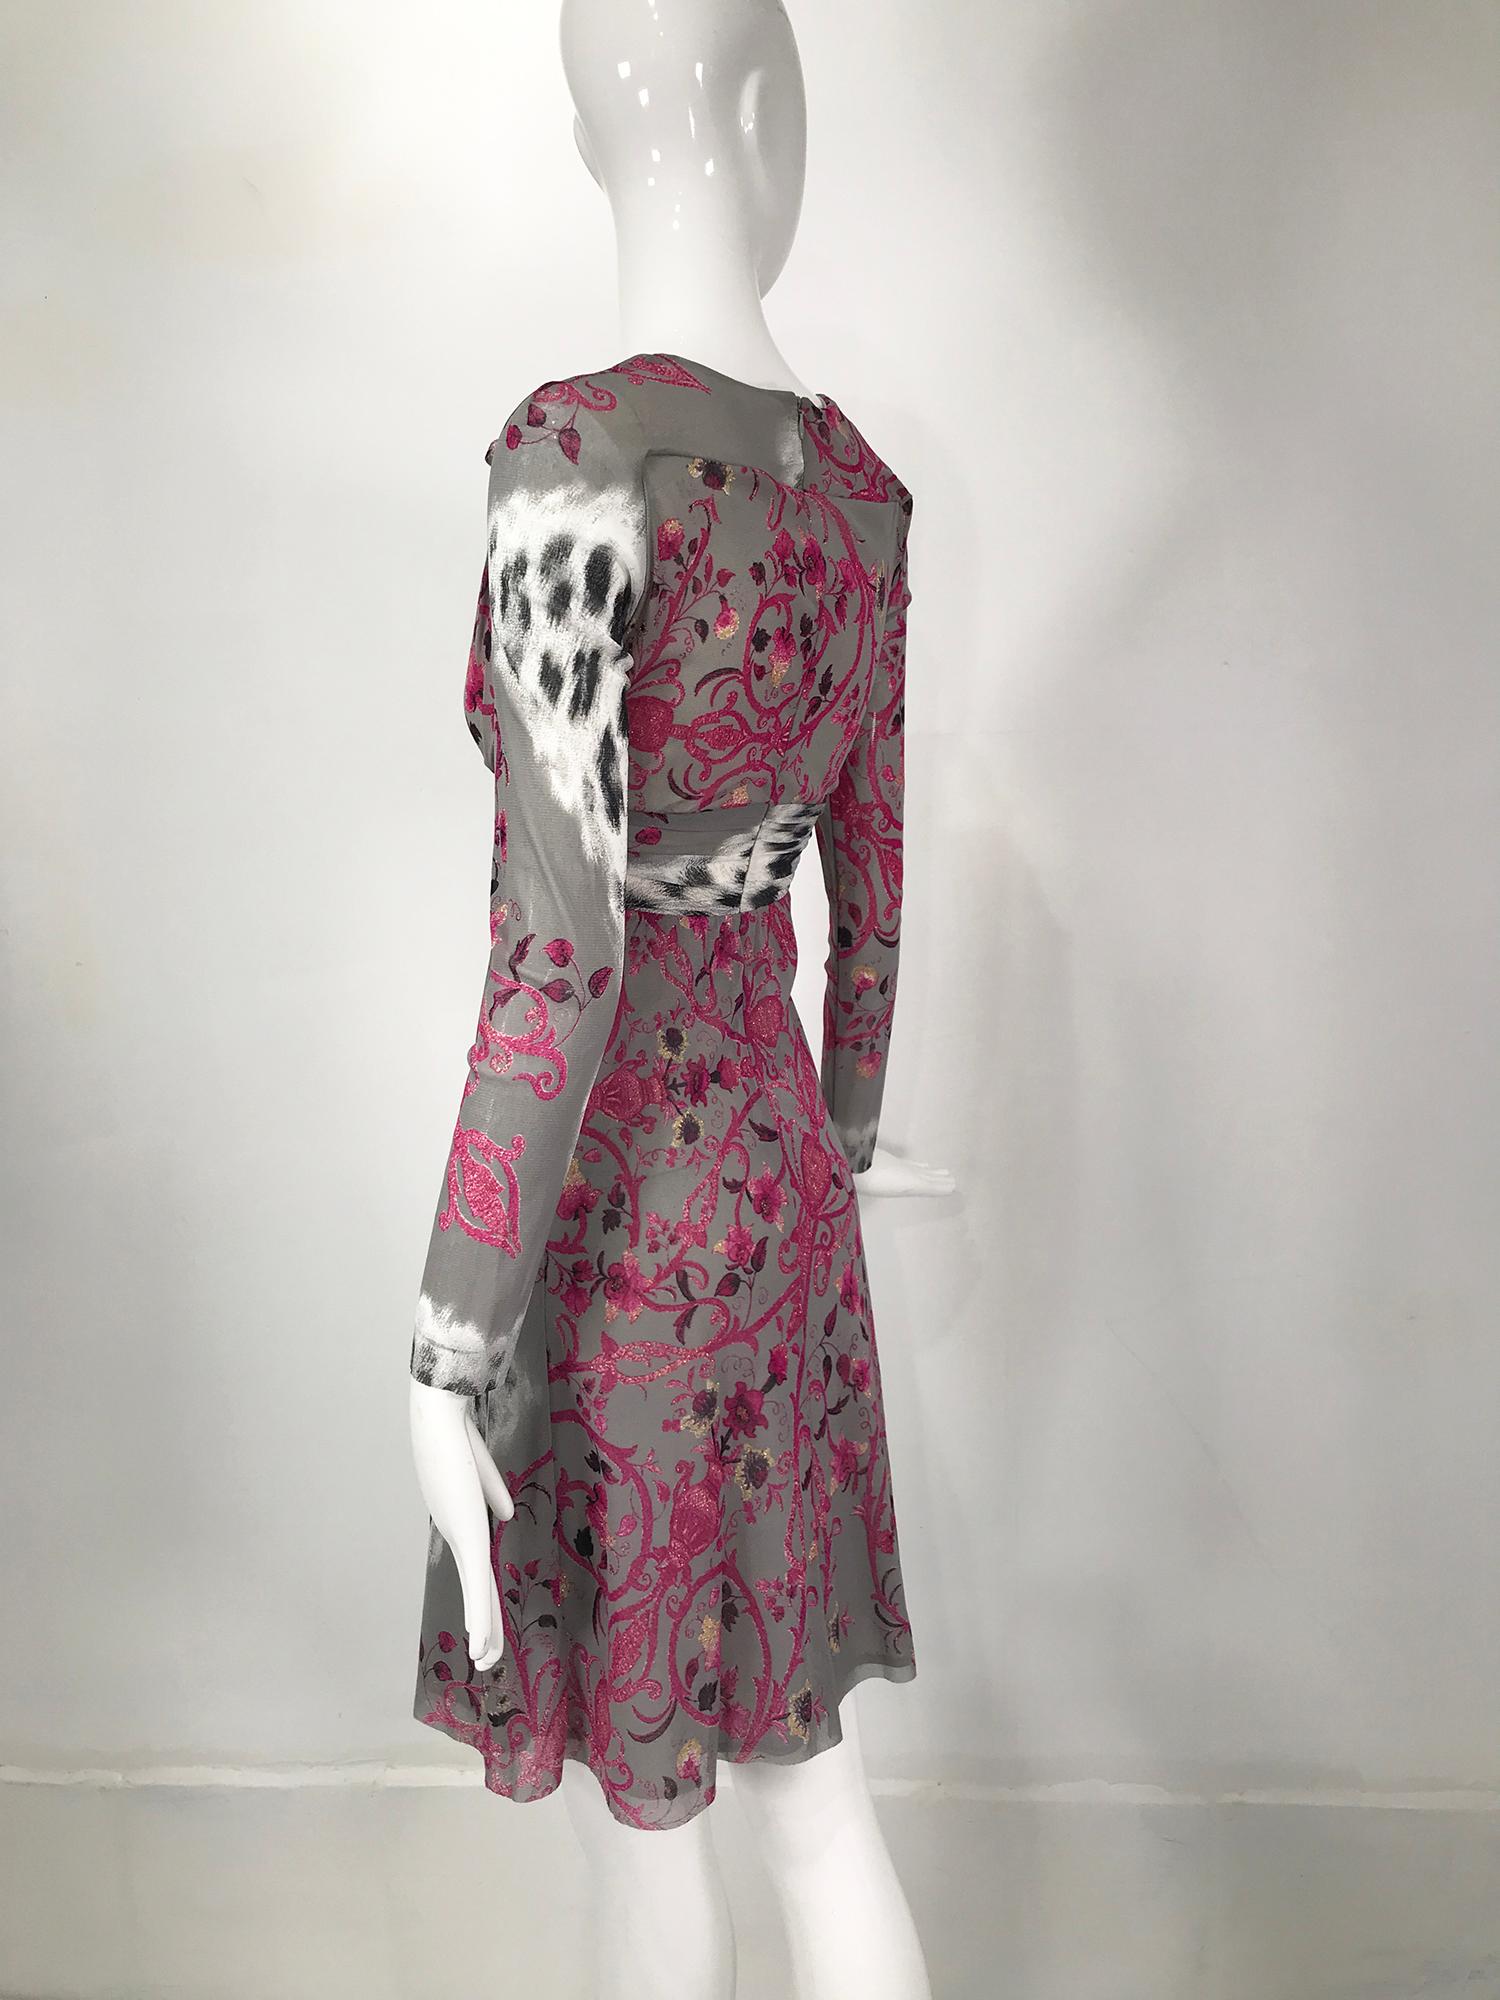 Roberto Cavalli Class V Neck Printed Mesh Empire Bodice Dress In Good Condition For Sale In West Palm Beach, FL